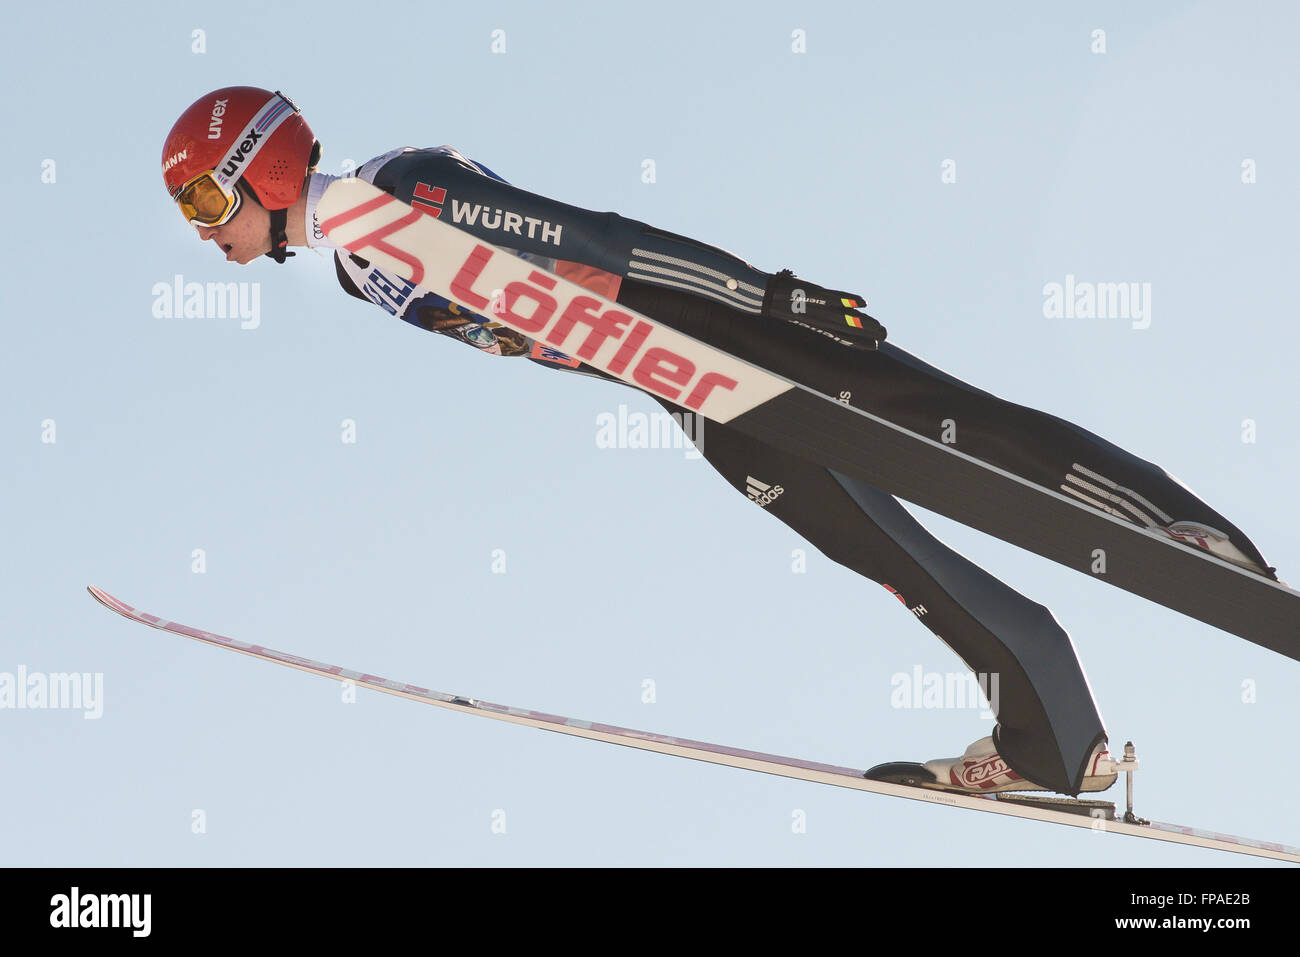 Planica, Slovenia. 18th Mar, 2016. Karl Geiger of Germany competes during Planica FIS Ski Jumping World Cup finals on the March 18, 2016 in Planica, Slovenia. © Rok Rakun/Pacific Press/Alamy Live News Stock Photo